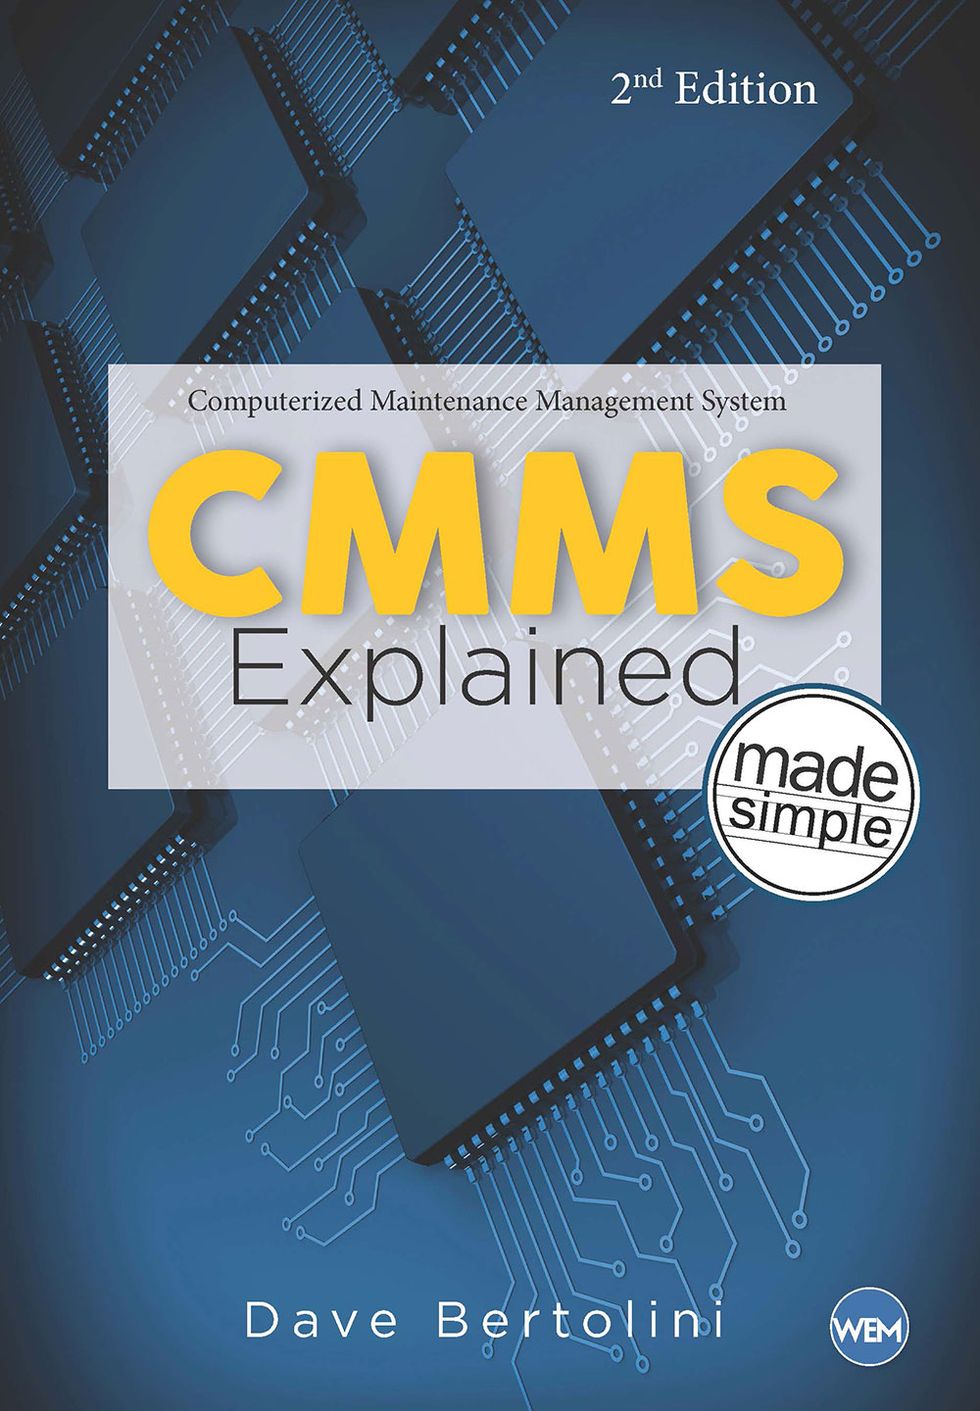  CMMS Explained Made Simple 2nd Edition 